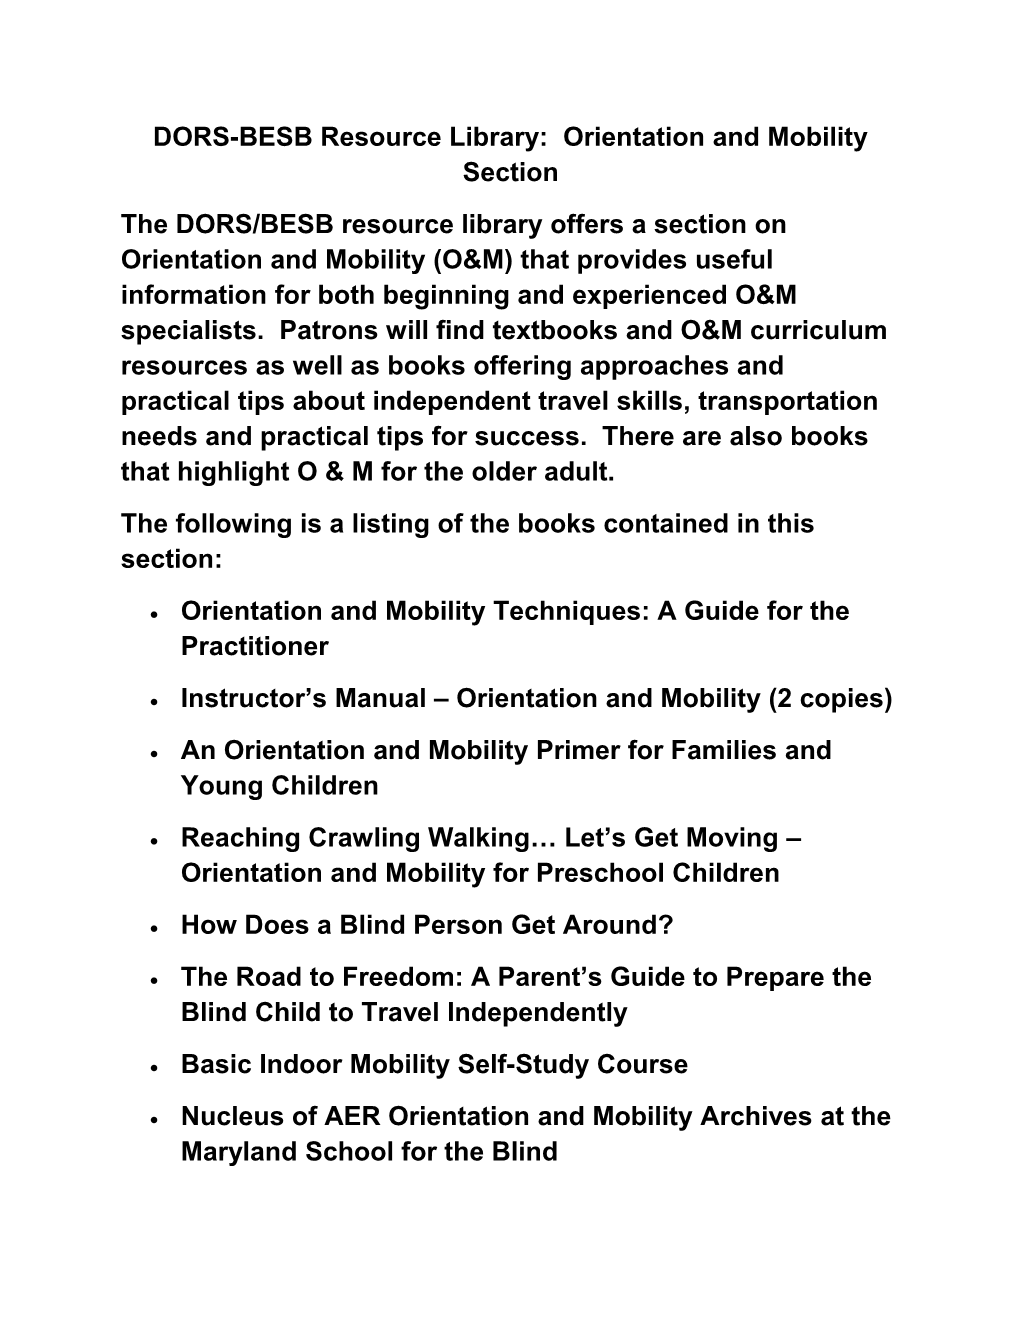 DORS-BESB Resource Library: Orientation and Mobility Section